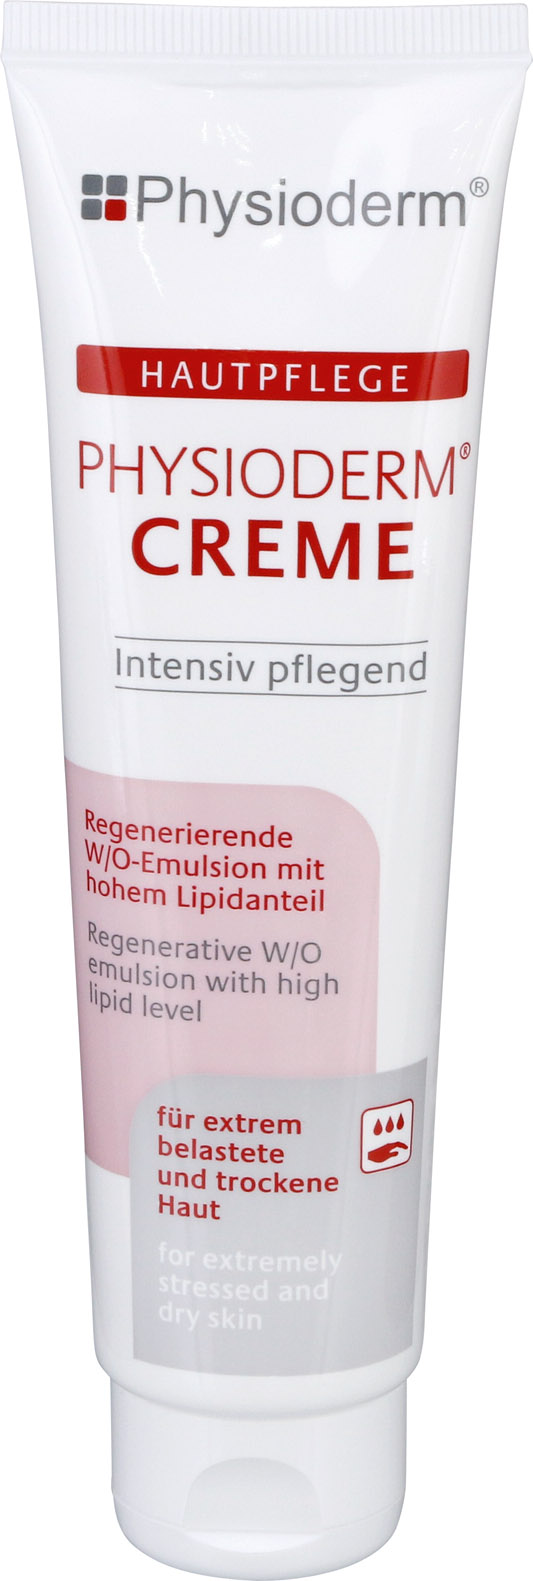 Picture of Hautpfl.Creme Physioderm,100 ml Tube